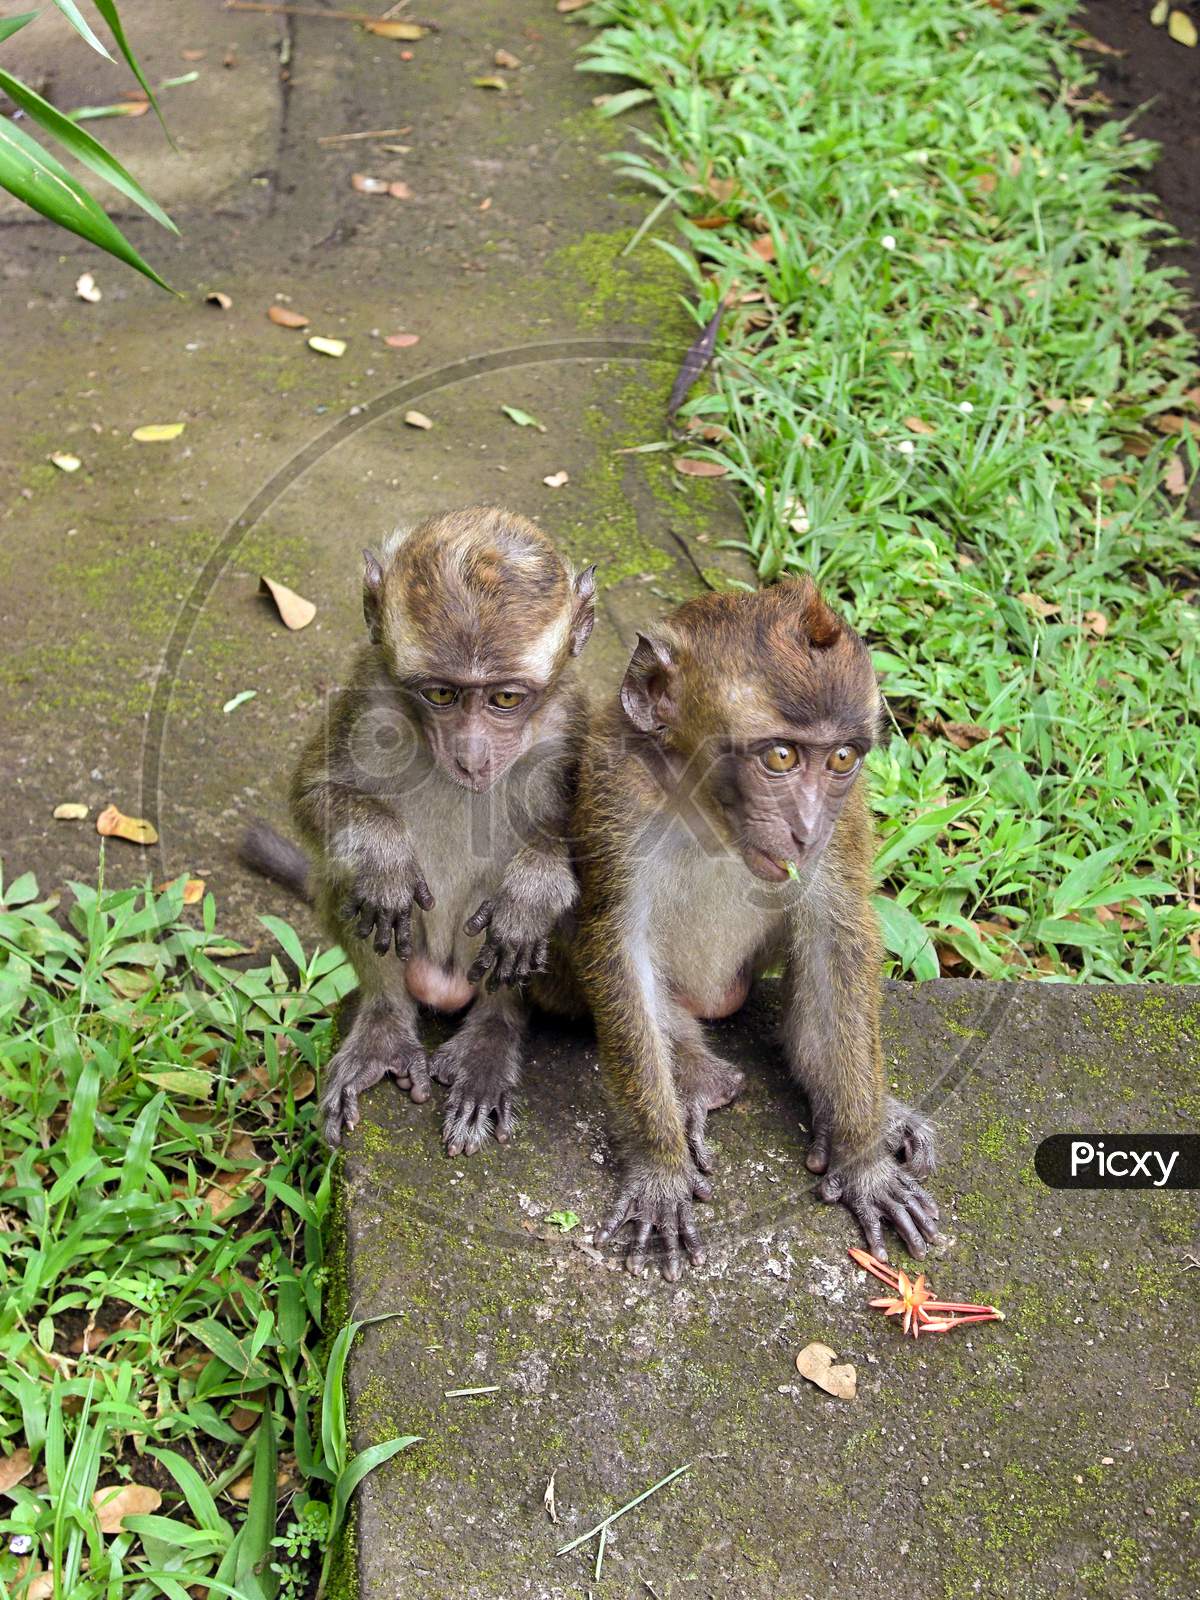 Monkeys On The Ground On The Philippines January 18, 2012